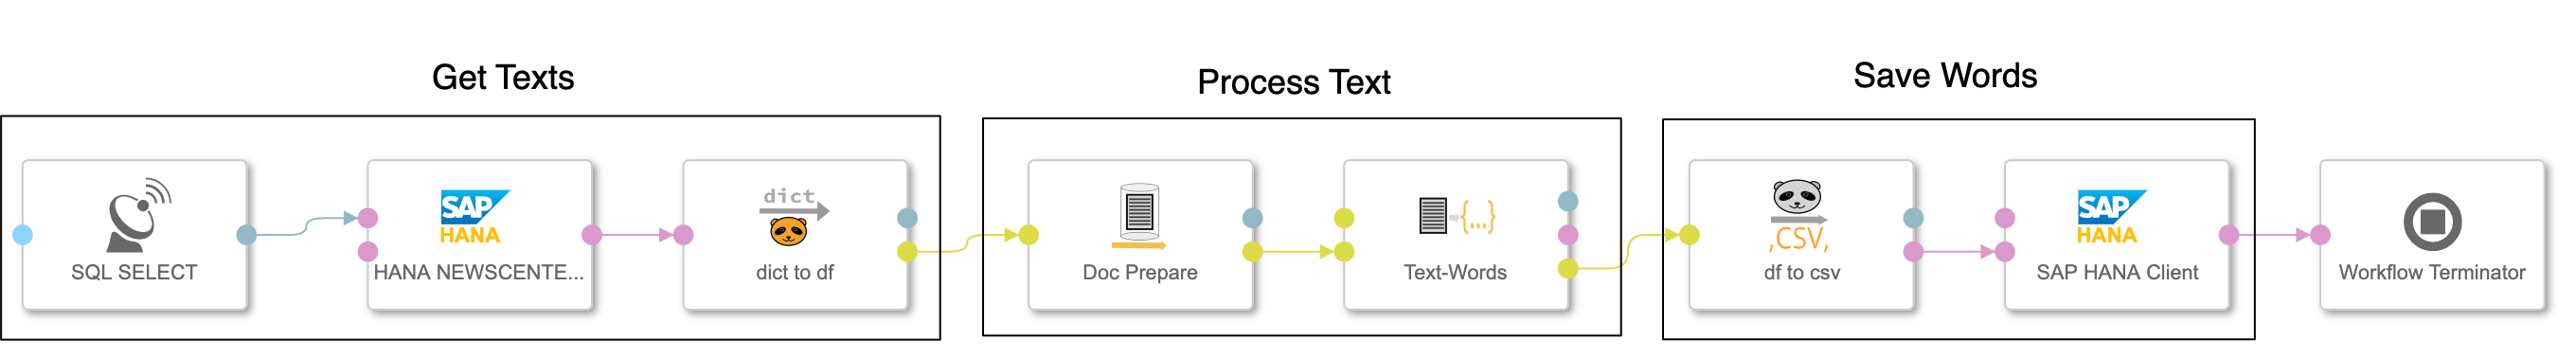 word text pipeline